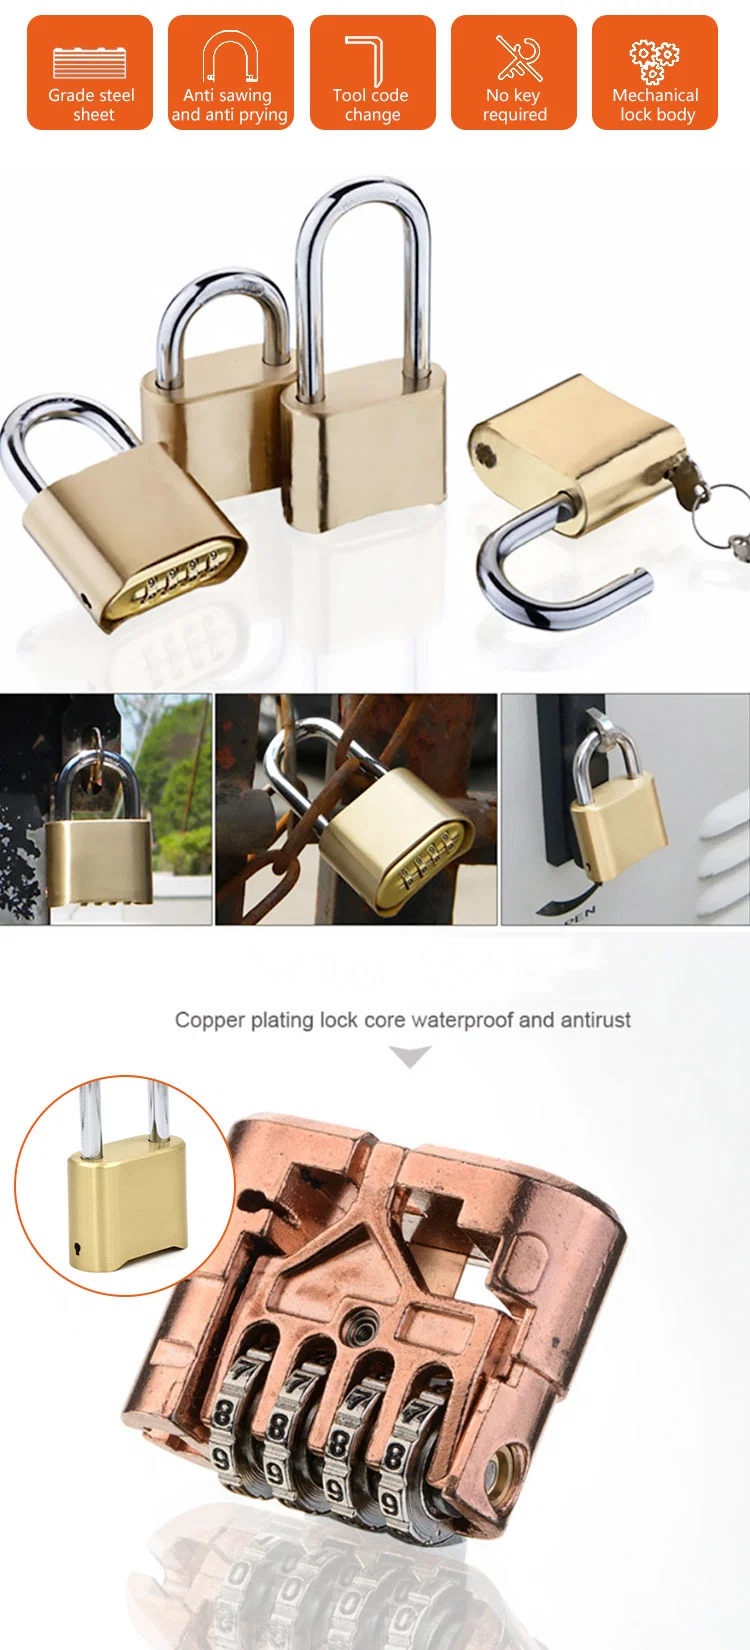 RP-025 Brass 4 Digit Combination Keyed Alike Padlock with Extra Long Shackle